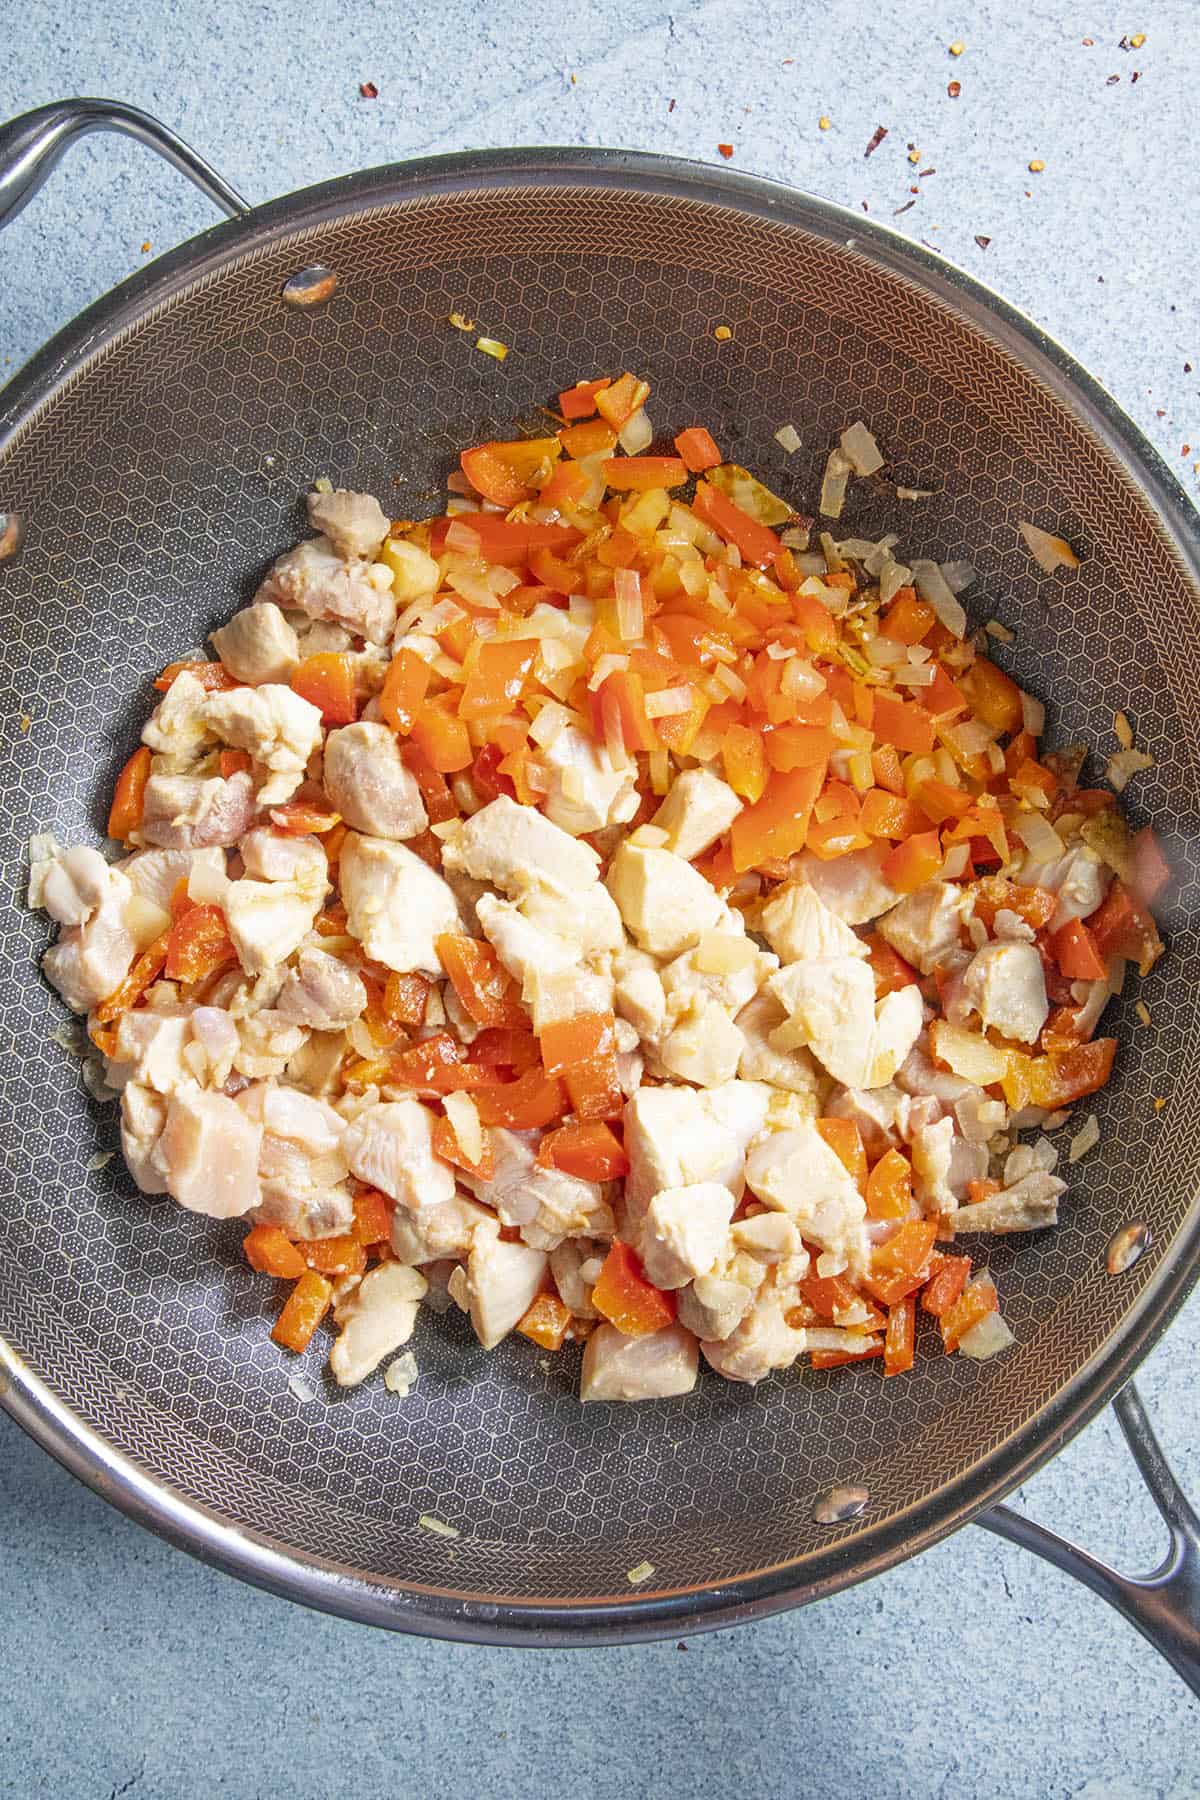 Cooking the chicken with the vegetables in the pan to make Panang Curry